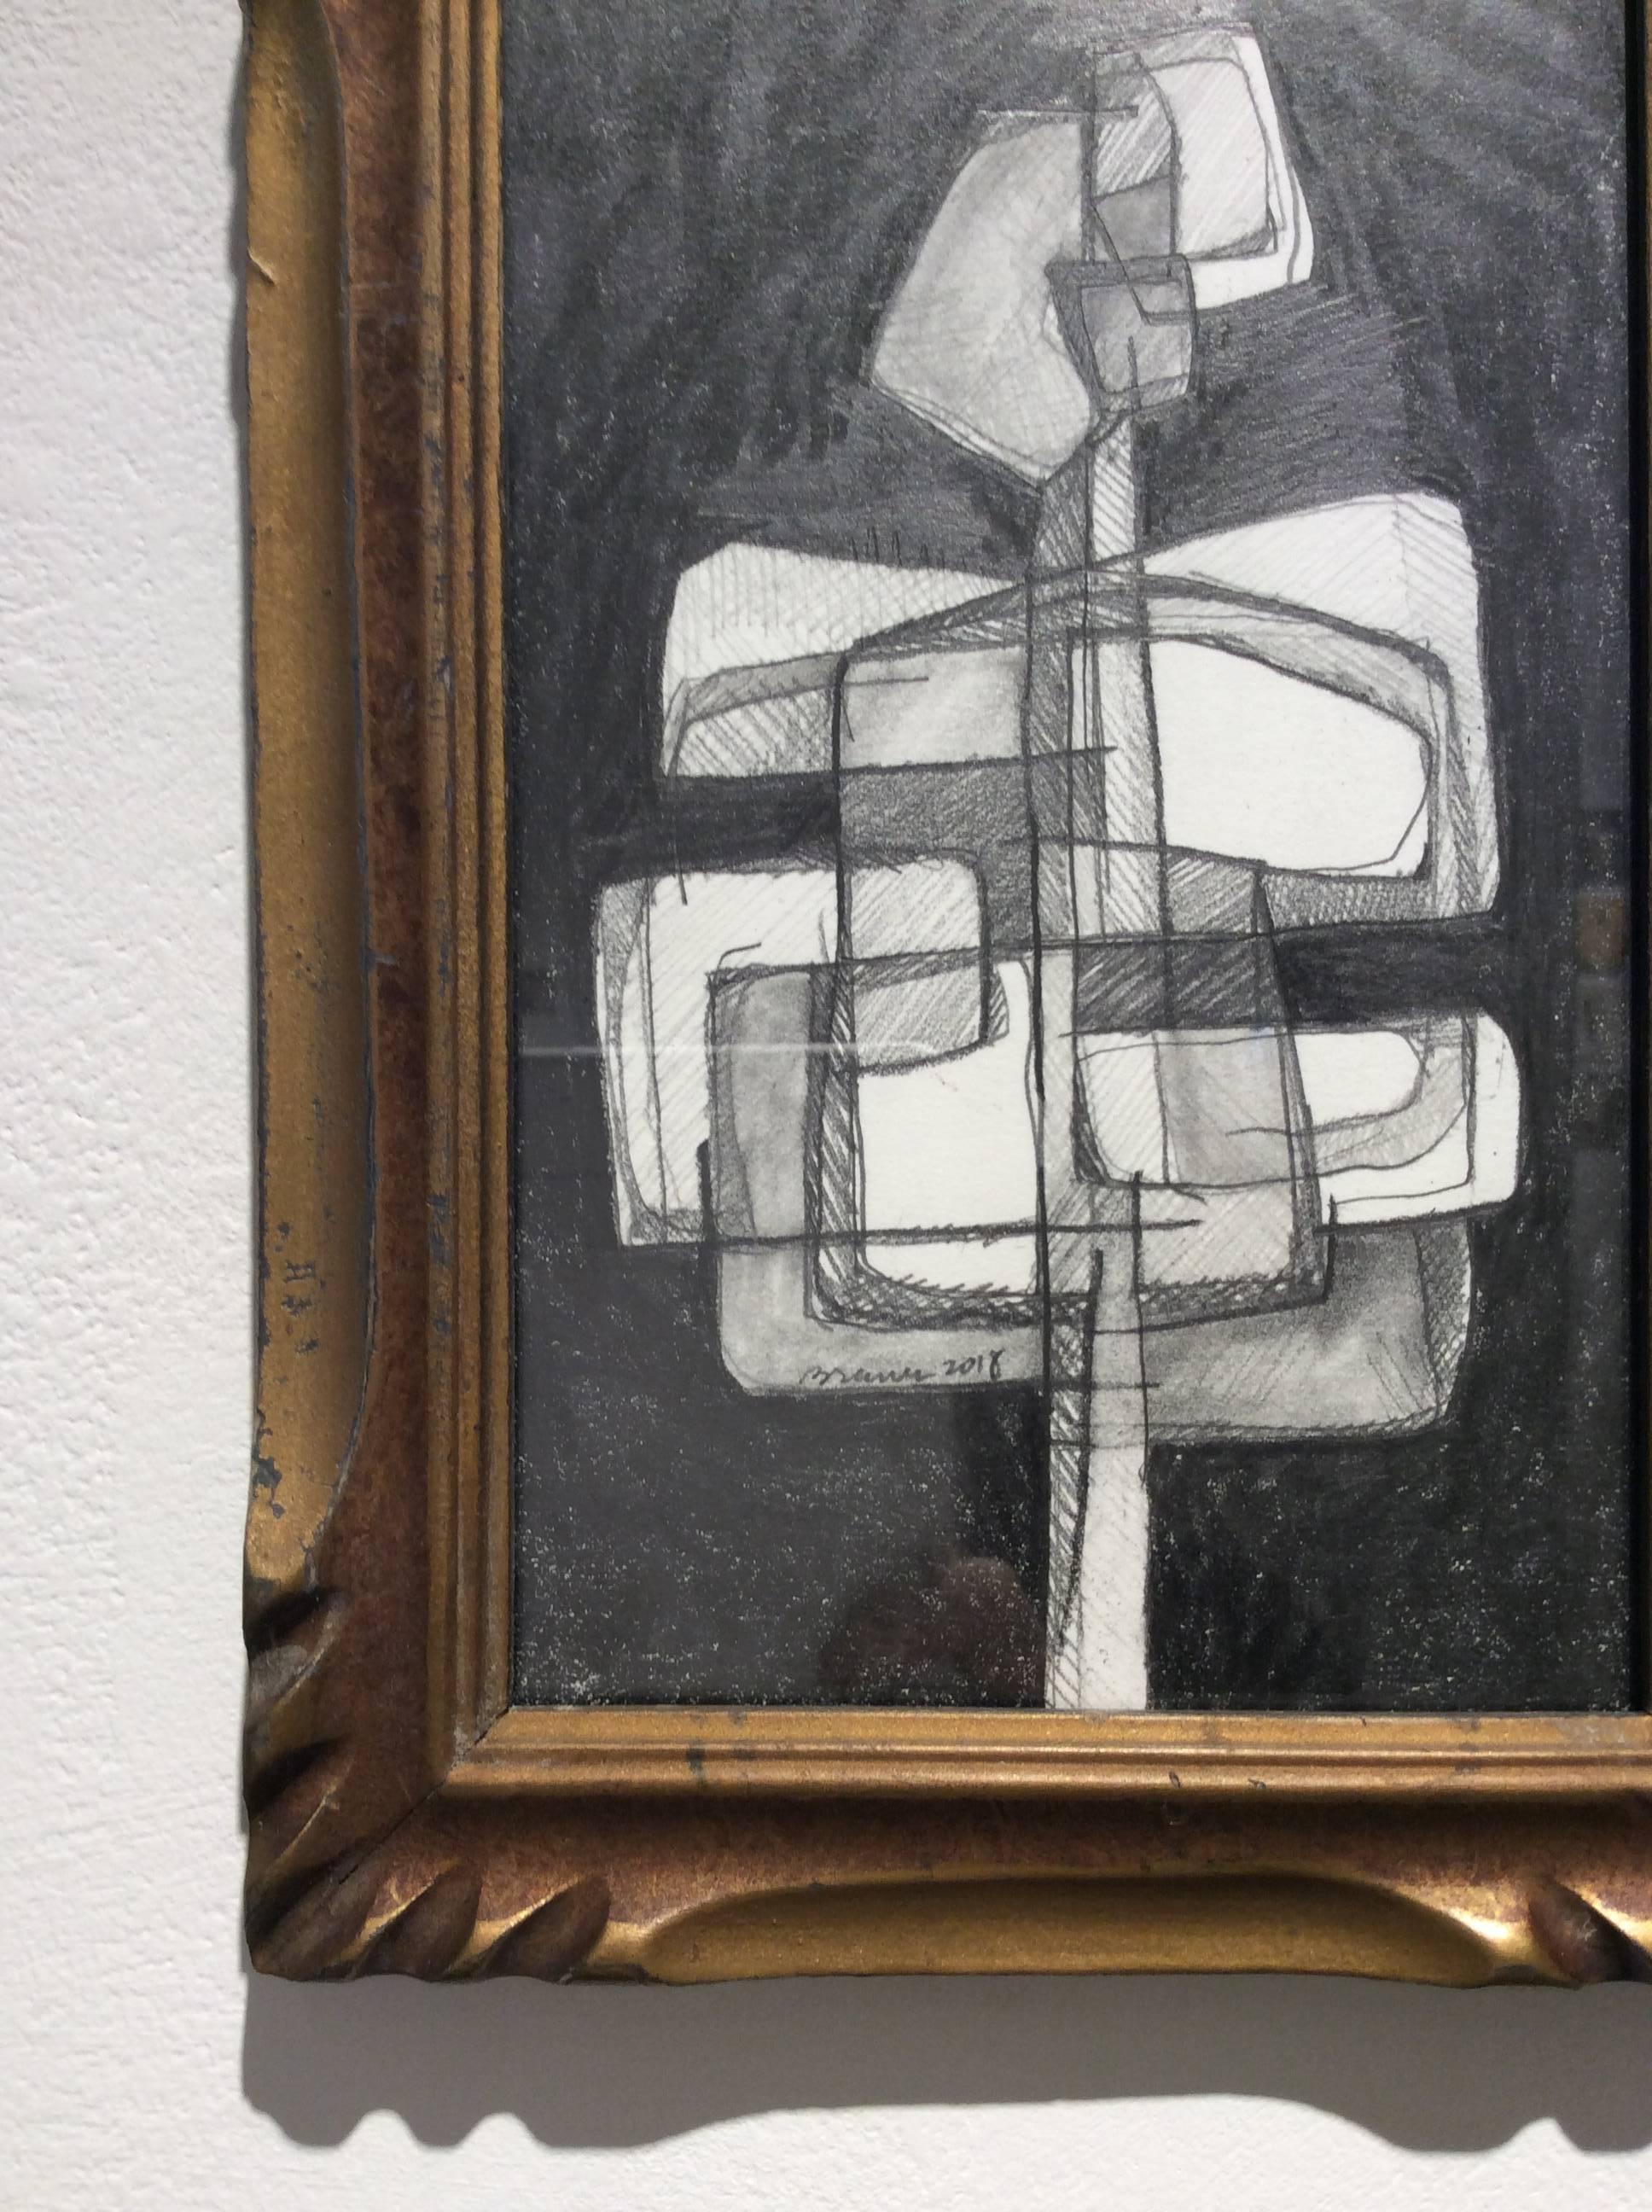 Infanta XLV (Small Abstract Figurative Graphite Drawing in Antique Wood Frame) - Contemporary Art by David Dew Bruner